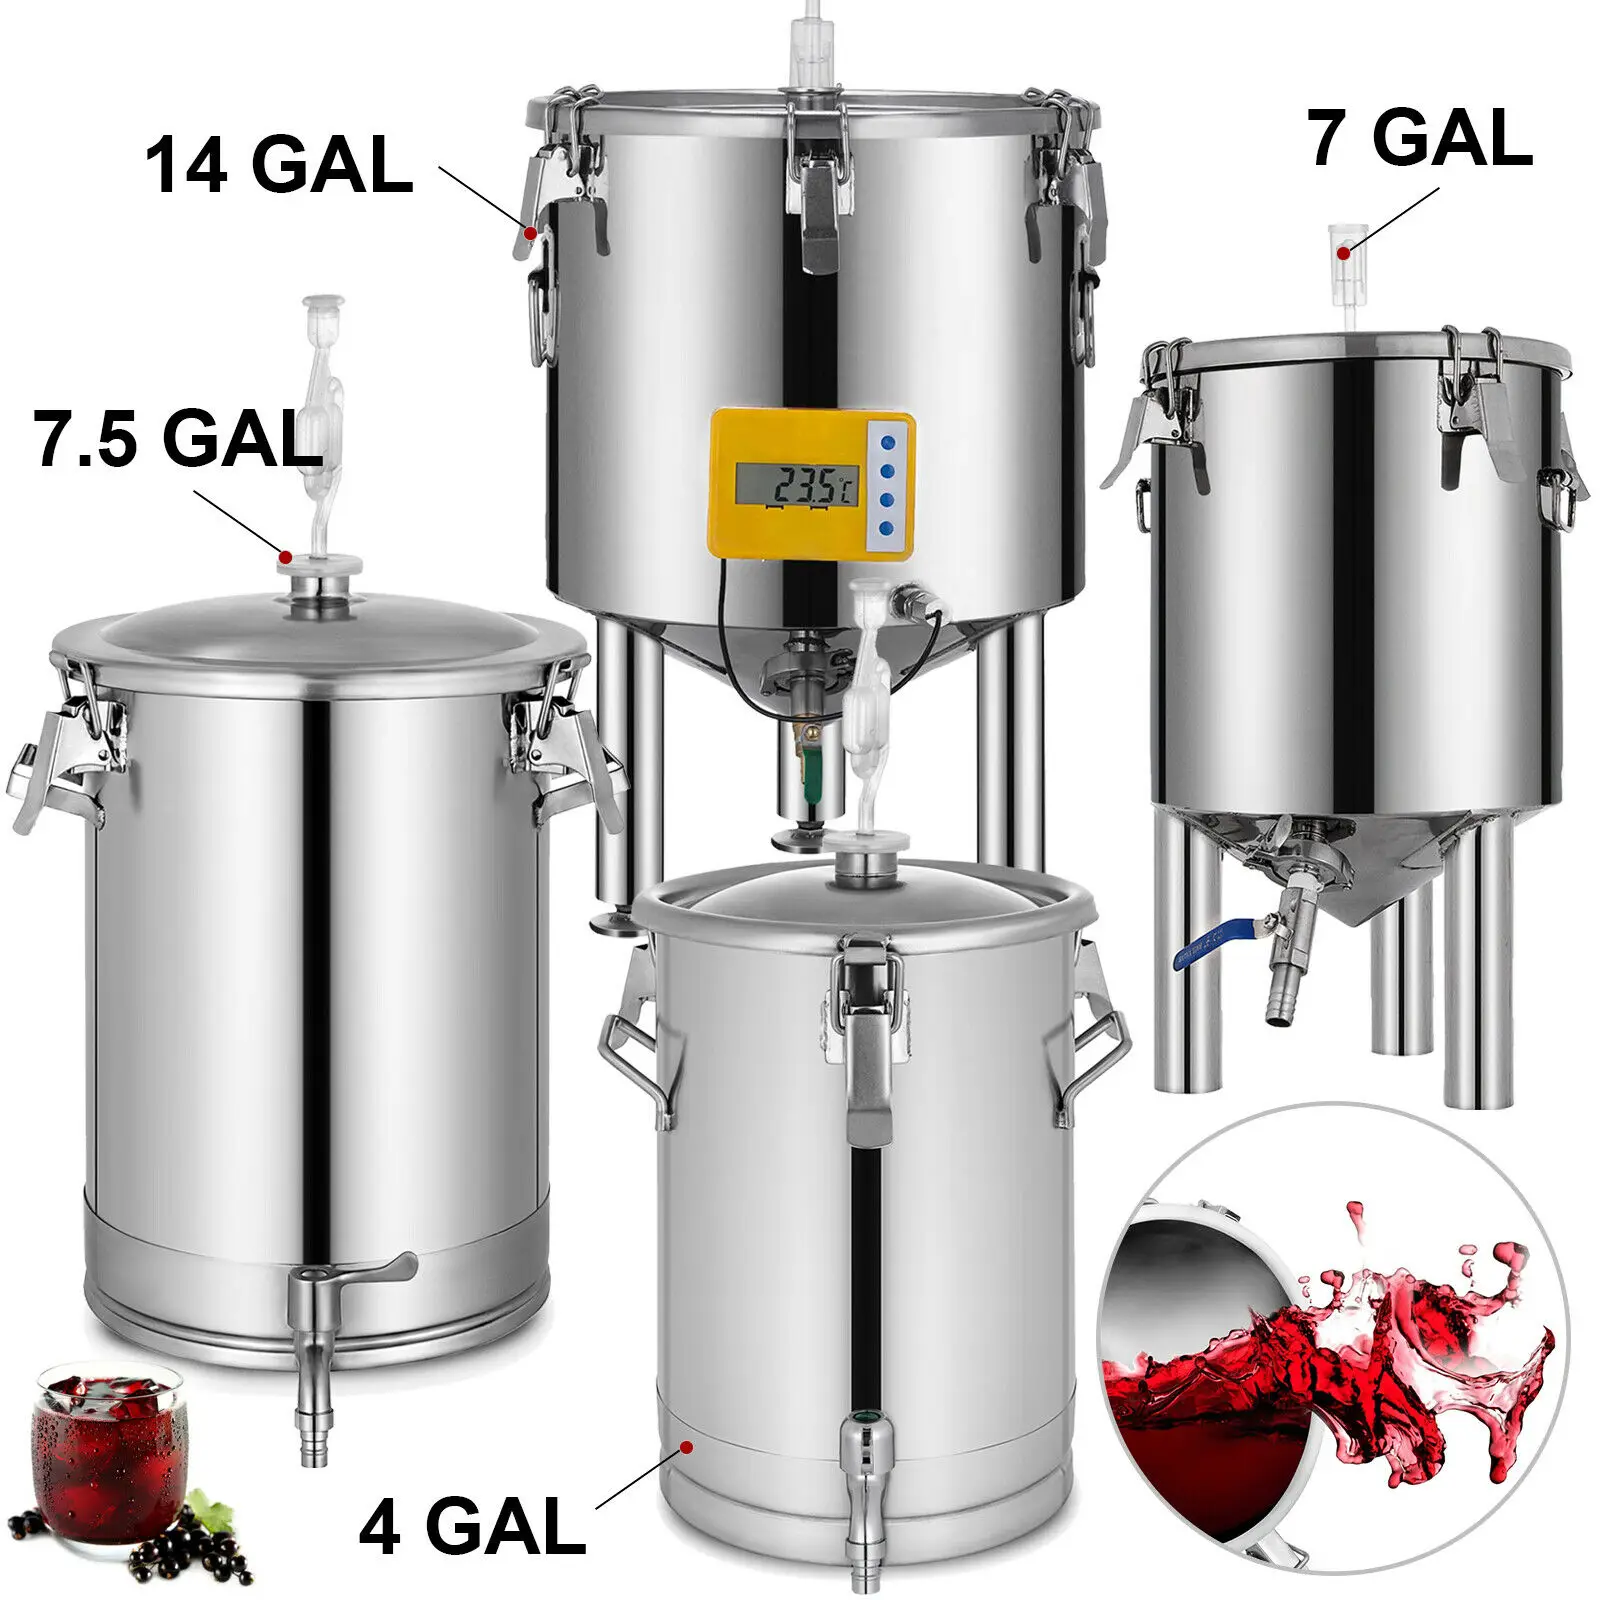 Good Sale and High Quality 304 Stainless Steel Wine Making 15L 28L 30L 53L Brew Bucket Beer Fermentor Tank Machine 1 25mm ss304 stainless steel sanitary 1 5 tri clamp butterfly valve homebrew beer dairy product